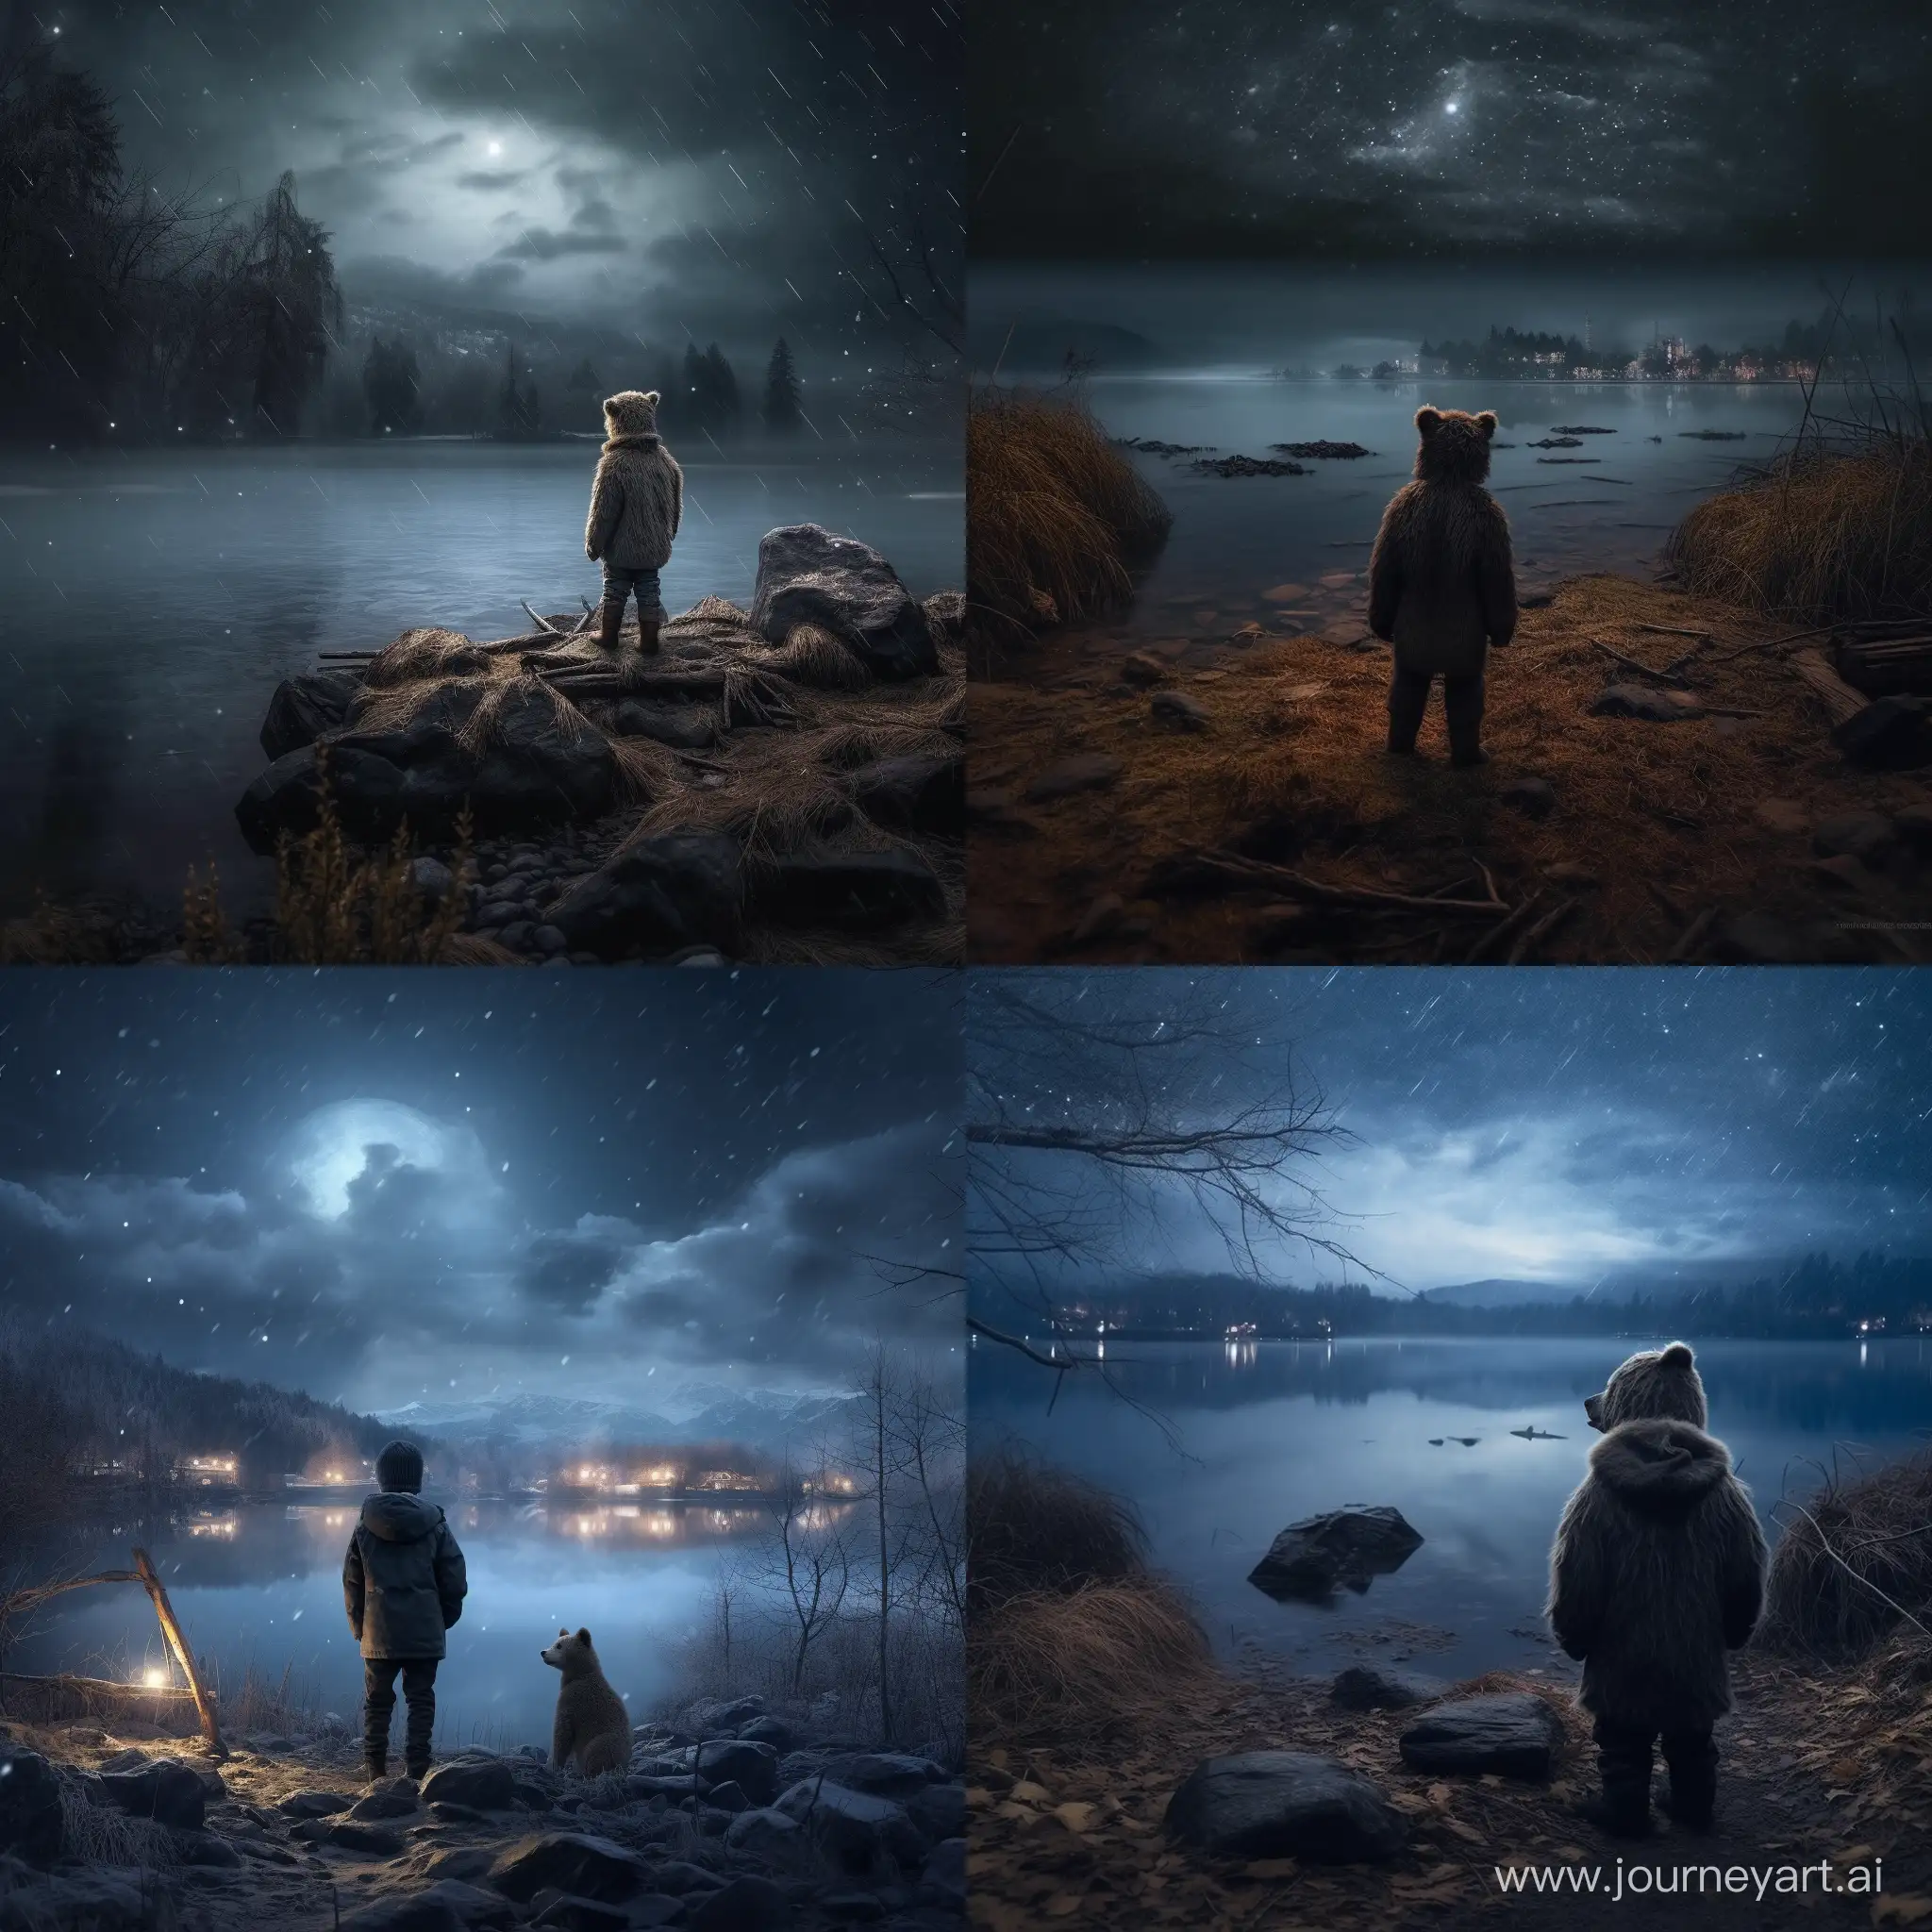 north, a boy in a fur coat stands near the river, a big dipper stands nearby, night, gloomy atmosphere, hyper-realism, 8K image quality, ultra detail